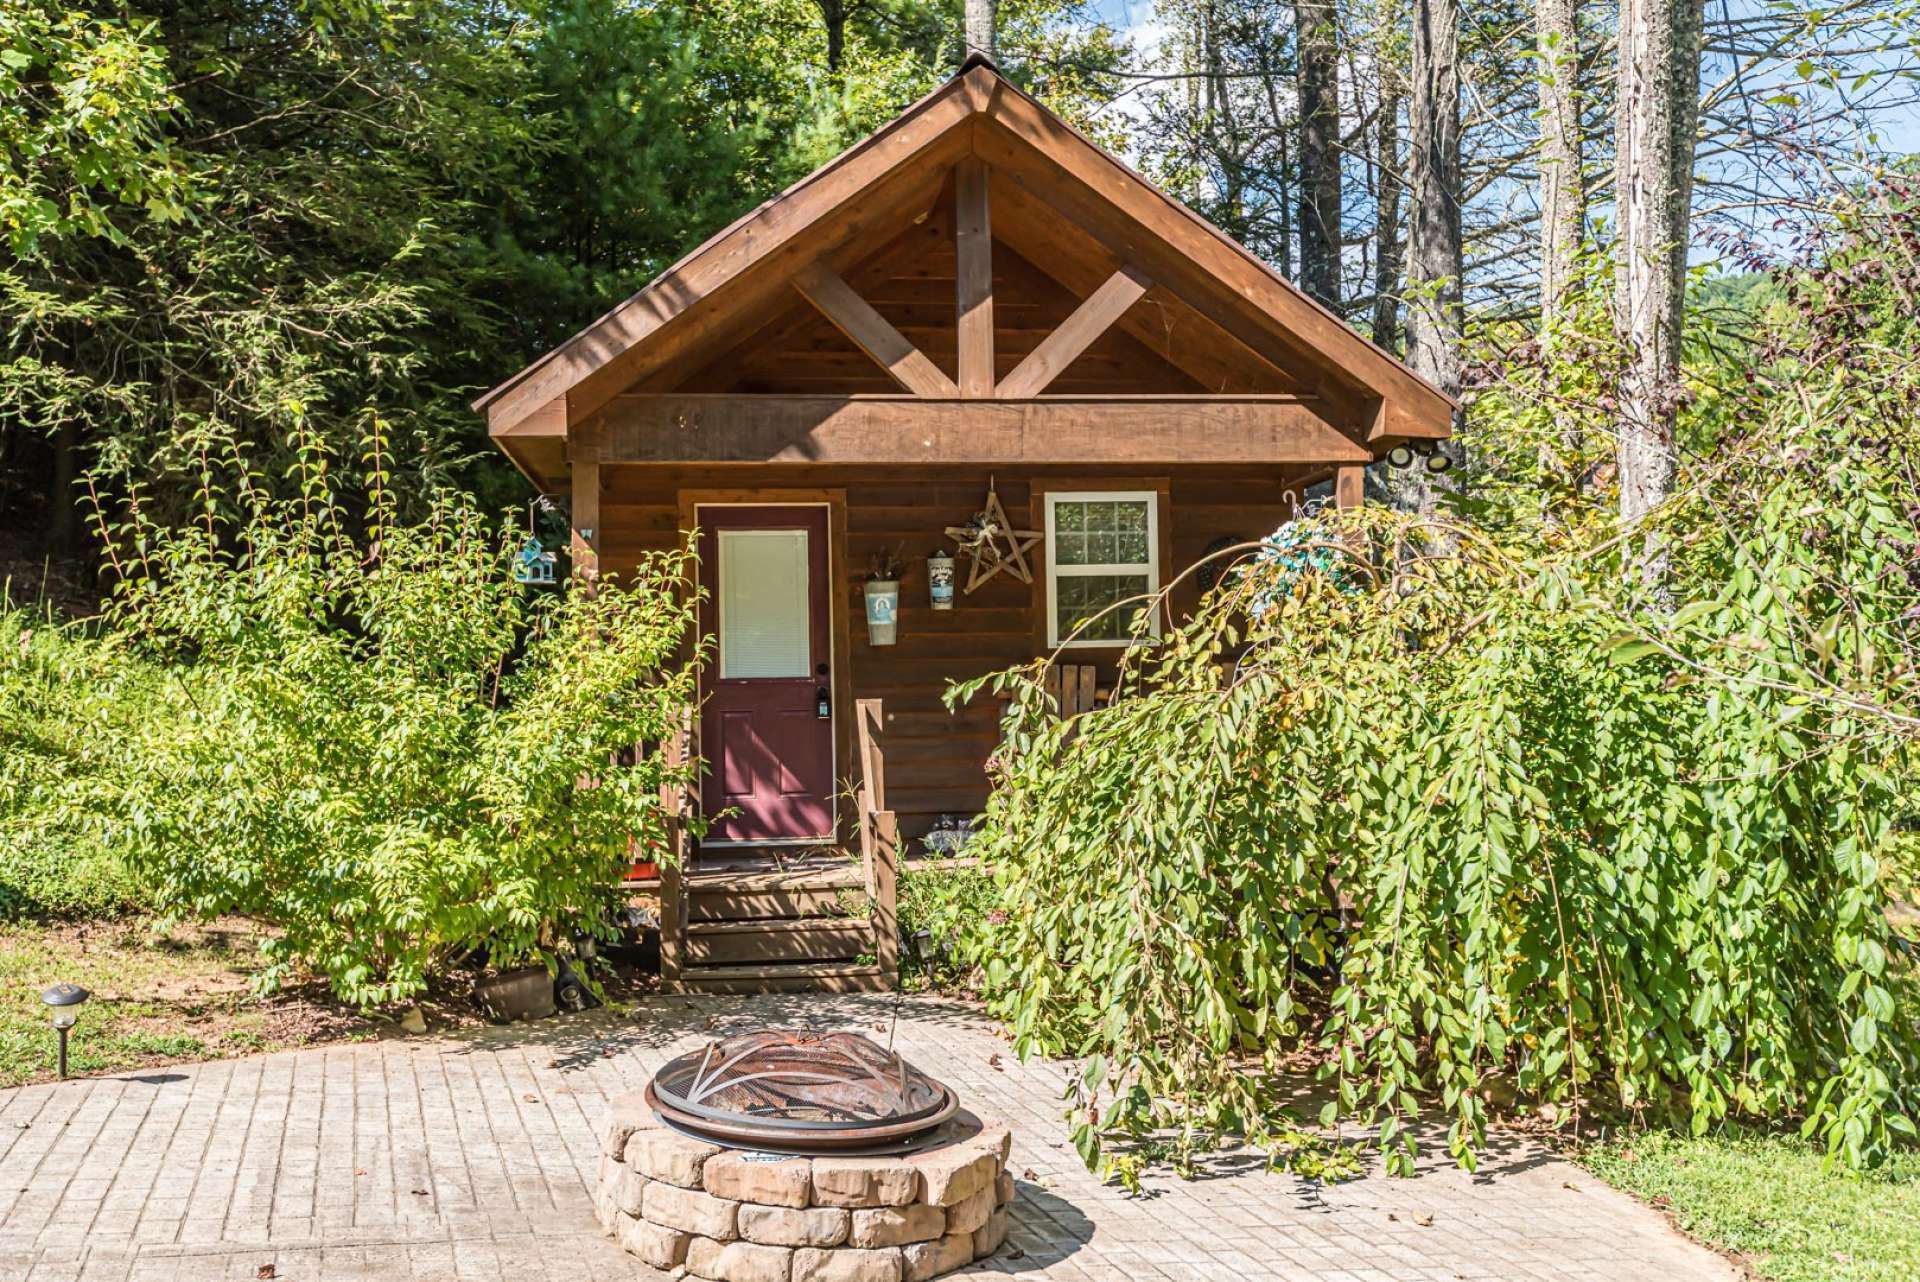 An added bonus is this charming bunkhouse complete with firepit area.